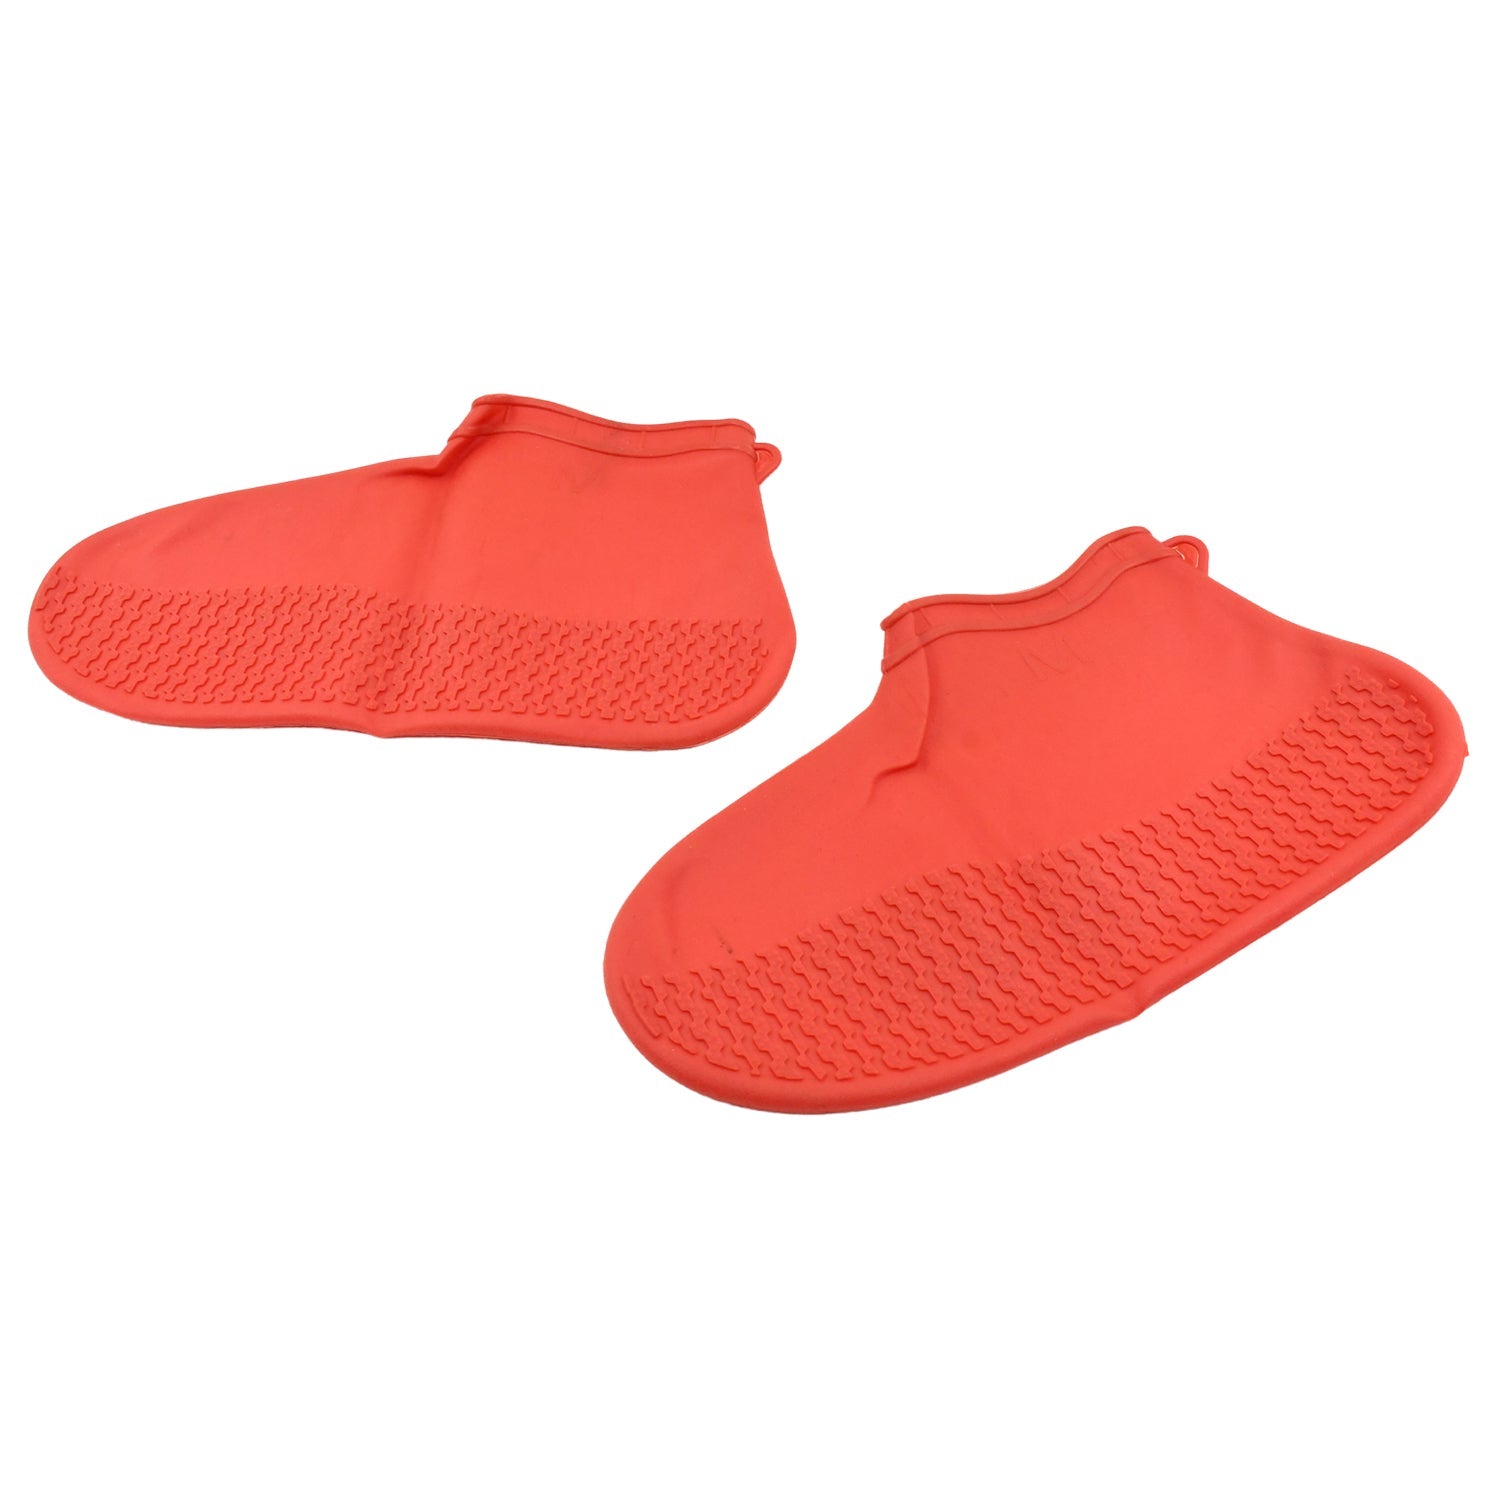 17985 Non-Slip Silicone Rain Reusable Anti skid Waterproof Fordable Boot Shoe Cover (Medium Size / 1 Pair / Red)